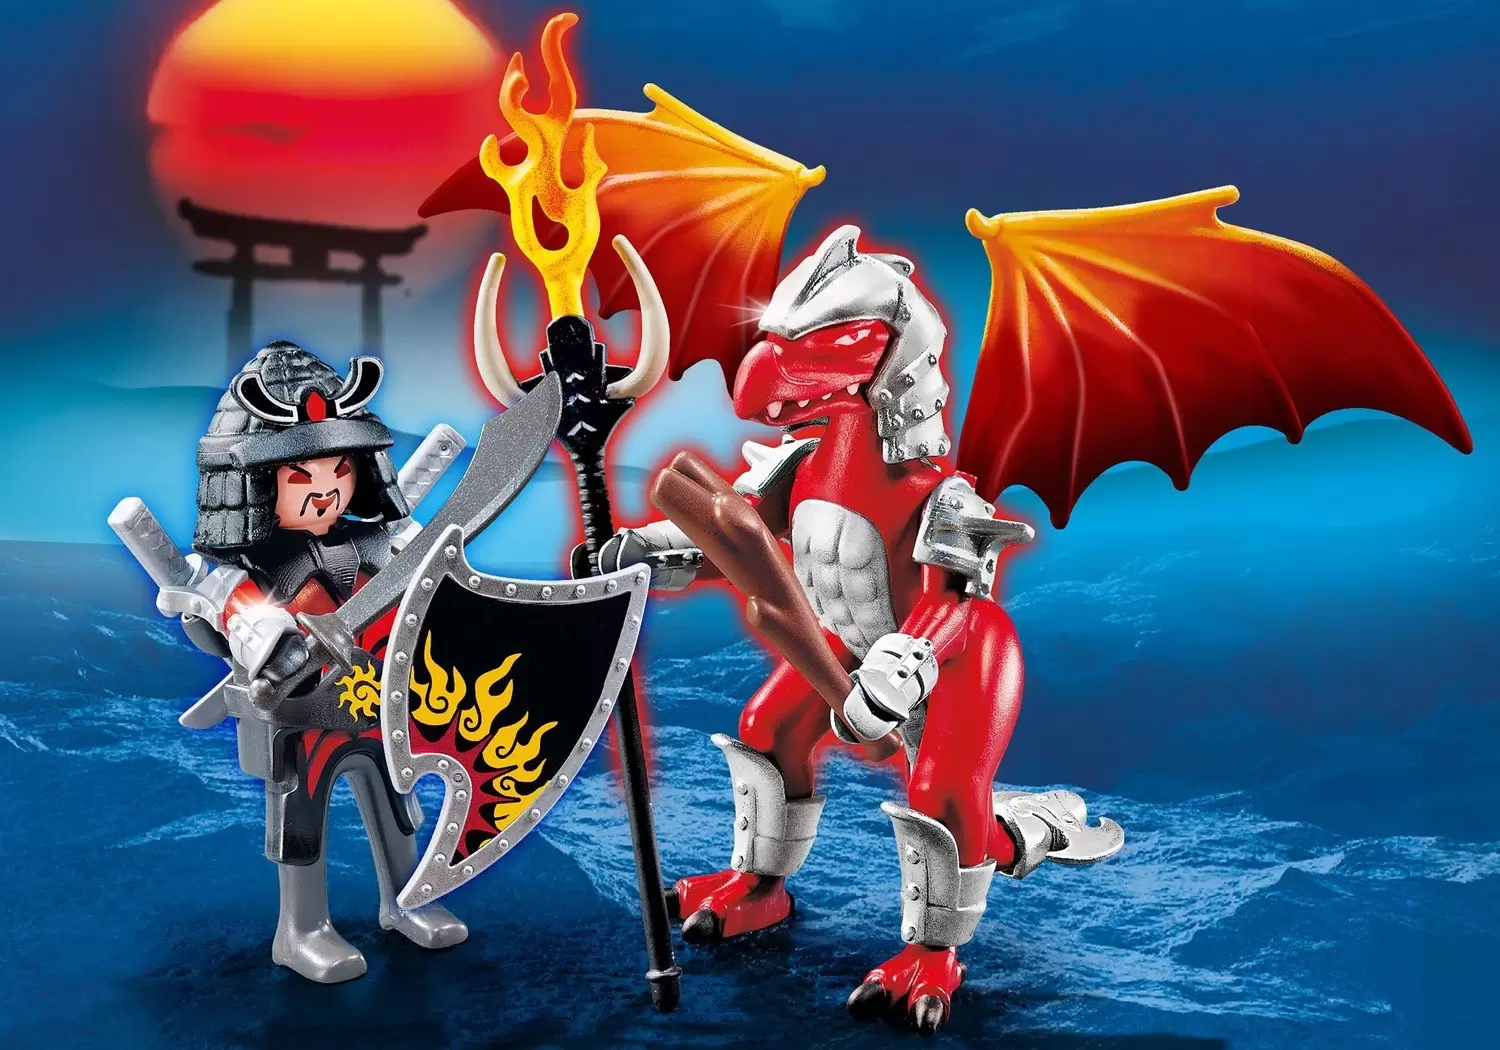 Playmobil Middle-Ages - Fire Dragon with Warrior